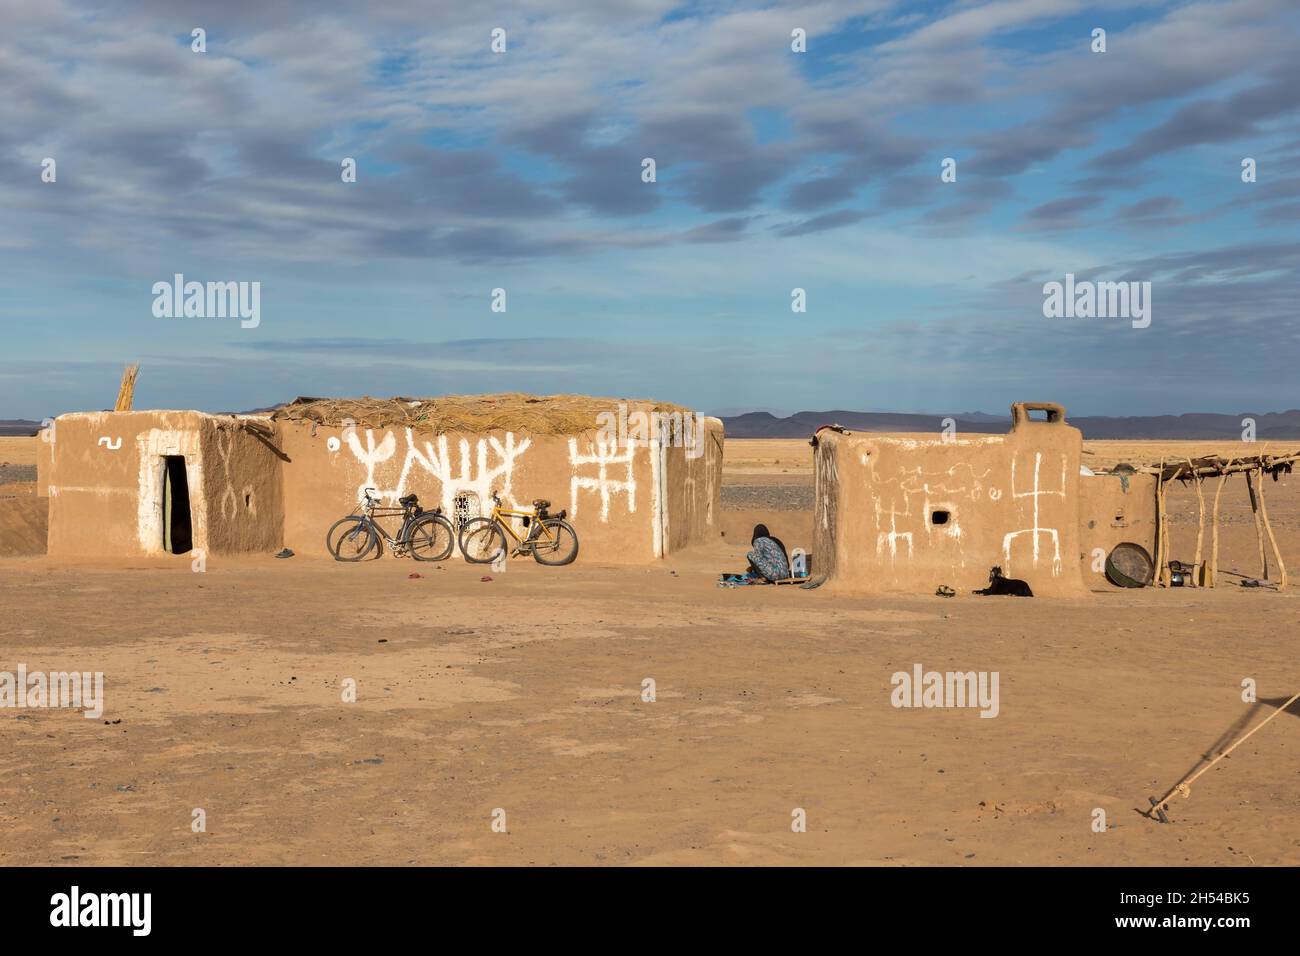 Errachidia Province, Morocco - October 23, 2015: Berber huts in the Sahara Desert. There are bicycles near the wall of the house. Stock Photo